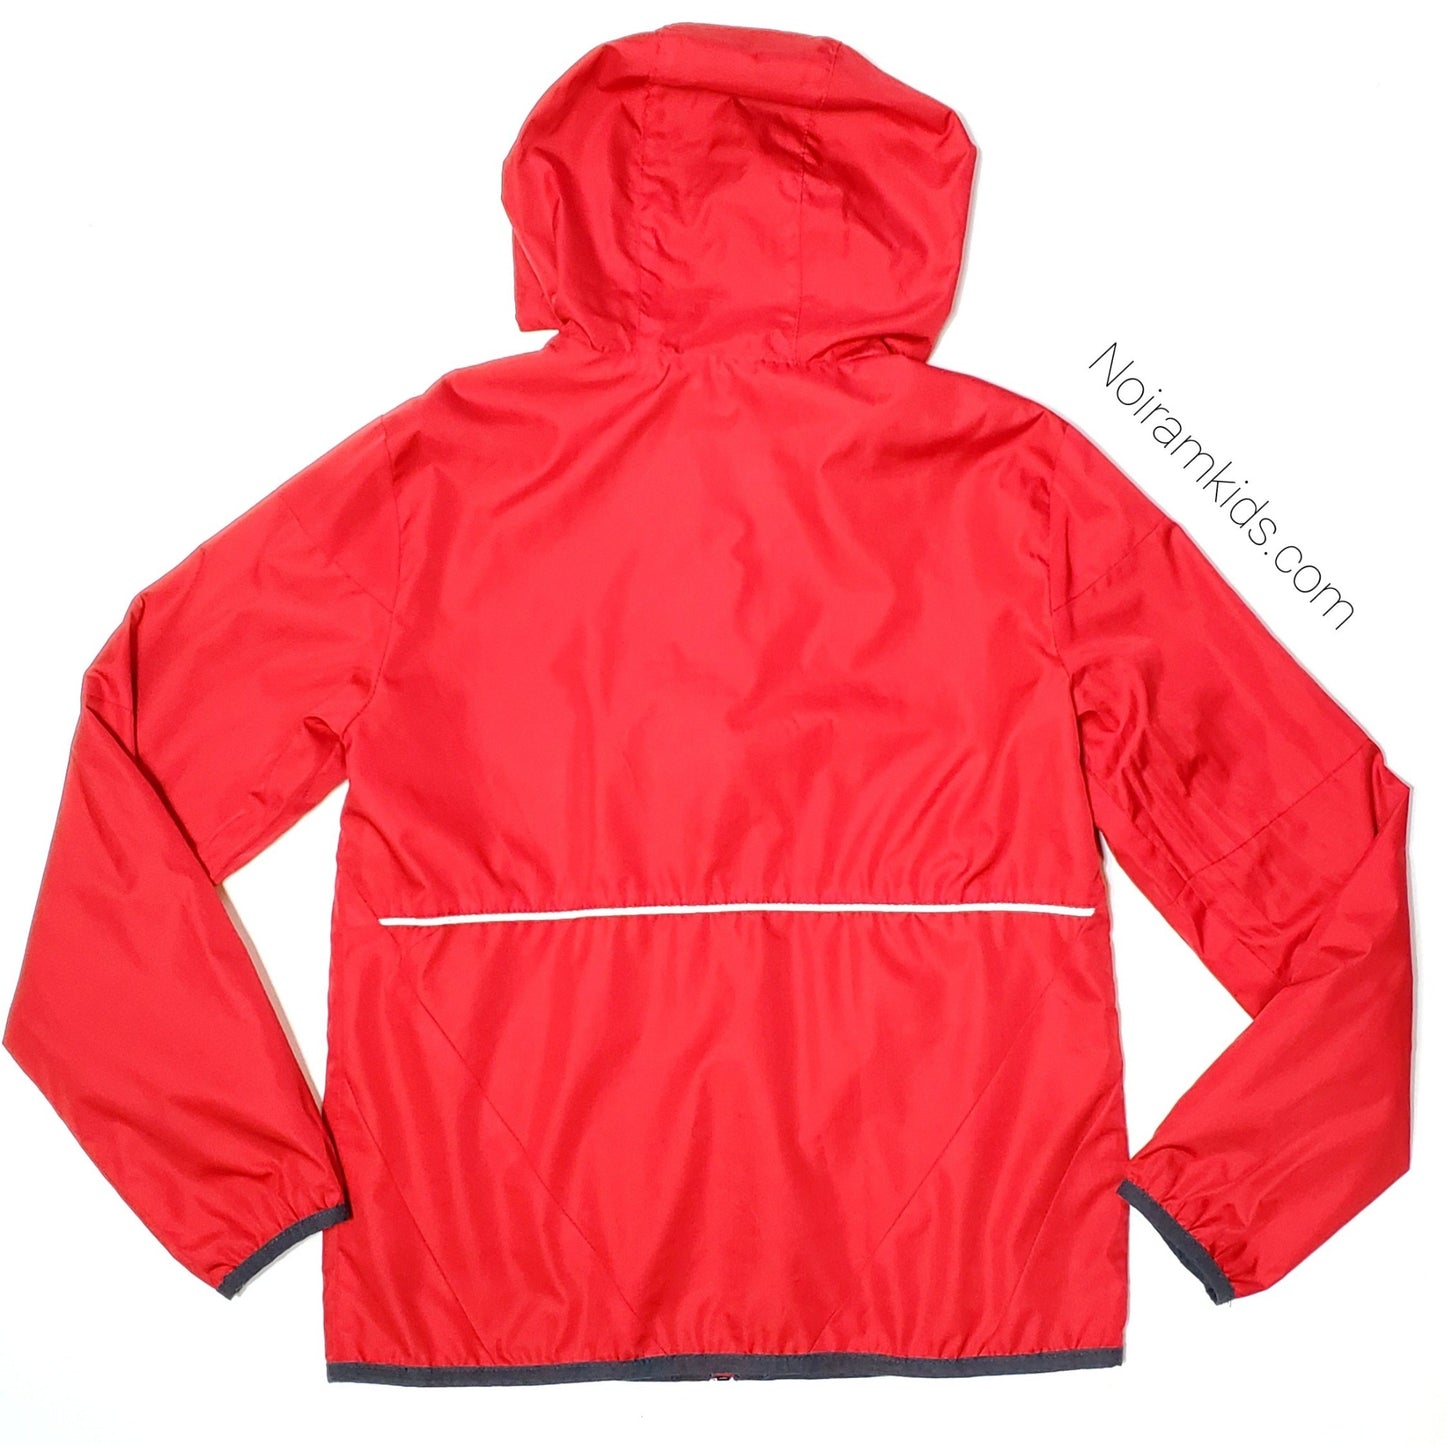 Champion Red Lightweight Boys Jacket Used View 3